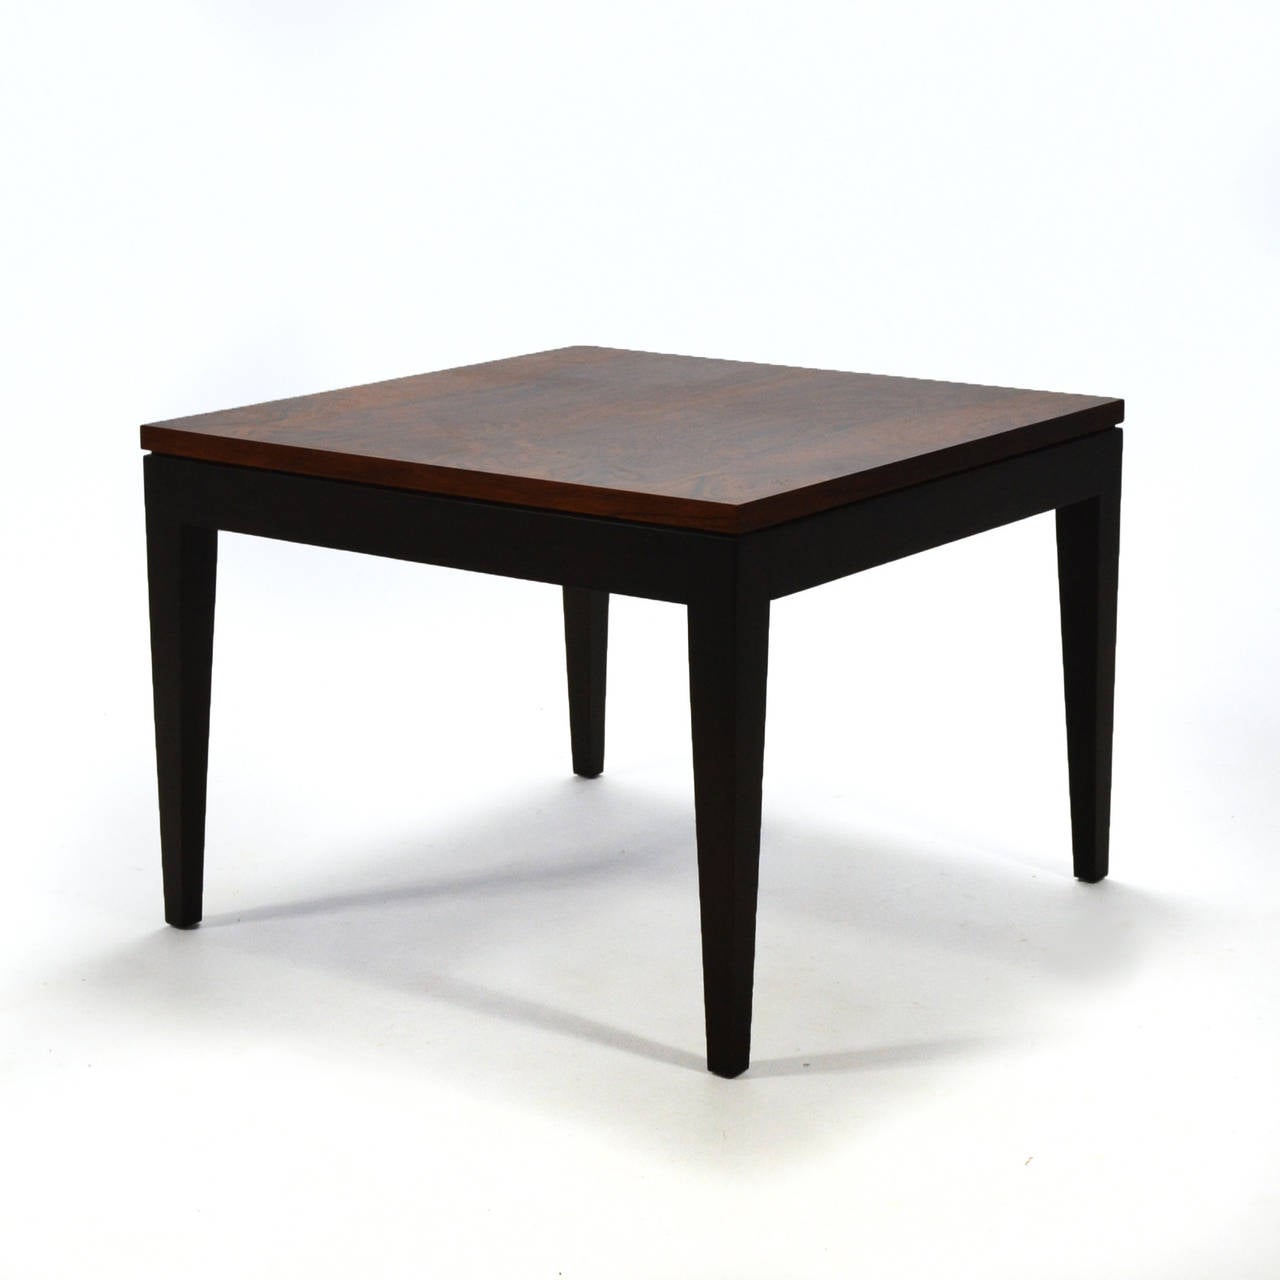 This end table has a stunningly beautiful top of rich, highly figured rosewood supported by an ebonized black base. Like all Knoll pieces it is impeccably constructed and features refined details like the subtle reveal between the top and the base.